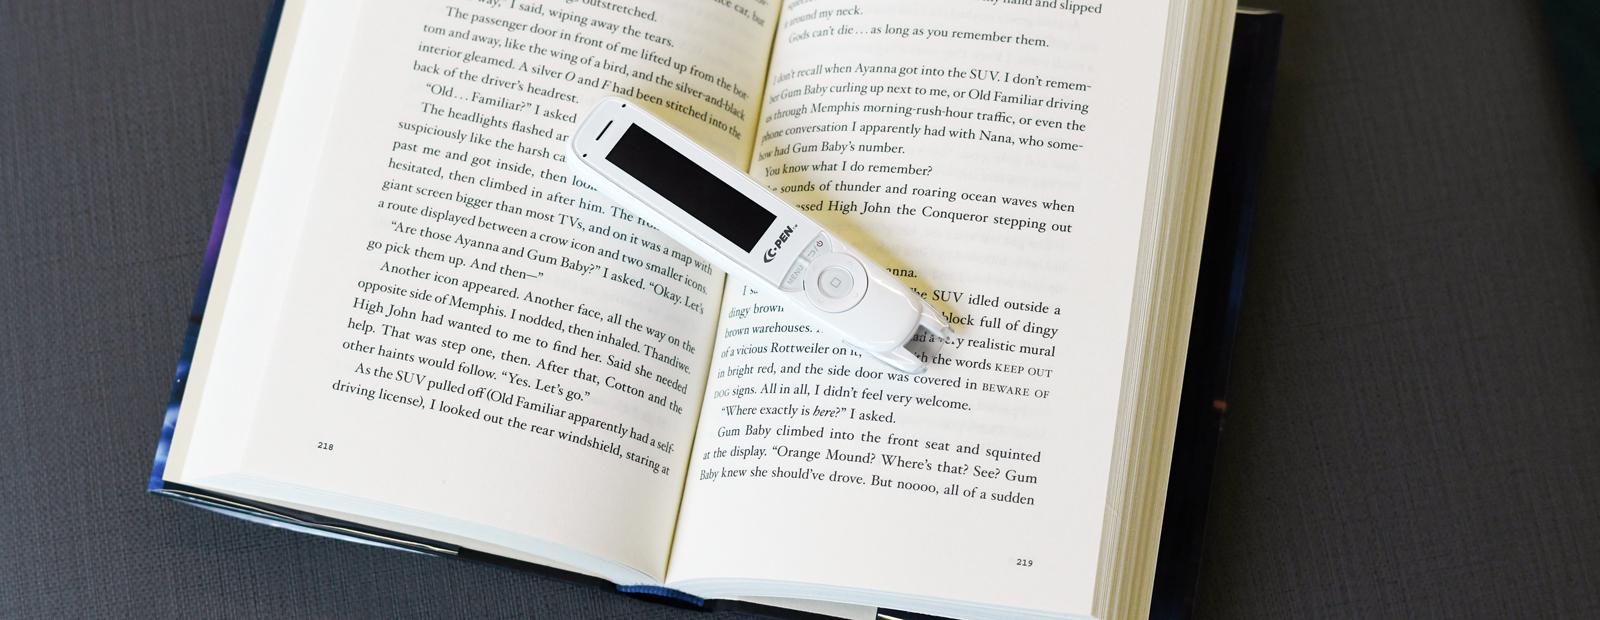 C-Pen ReaderPen placed in the centre of an open book.